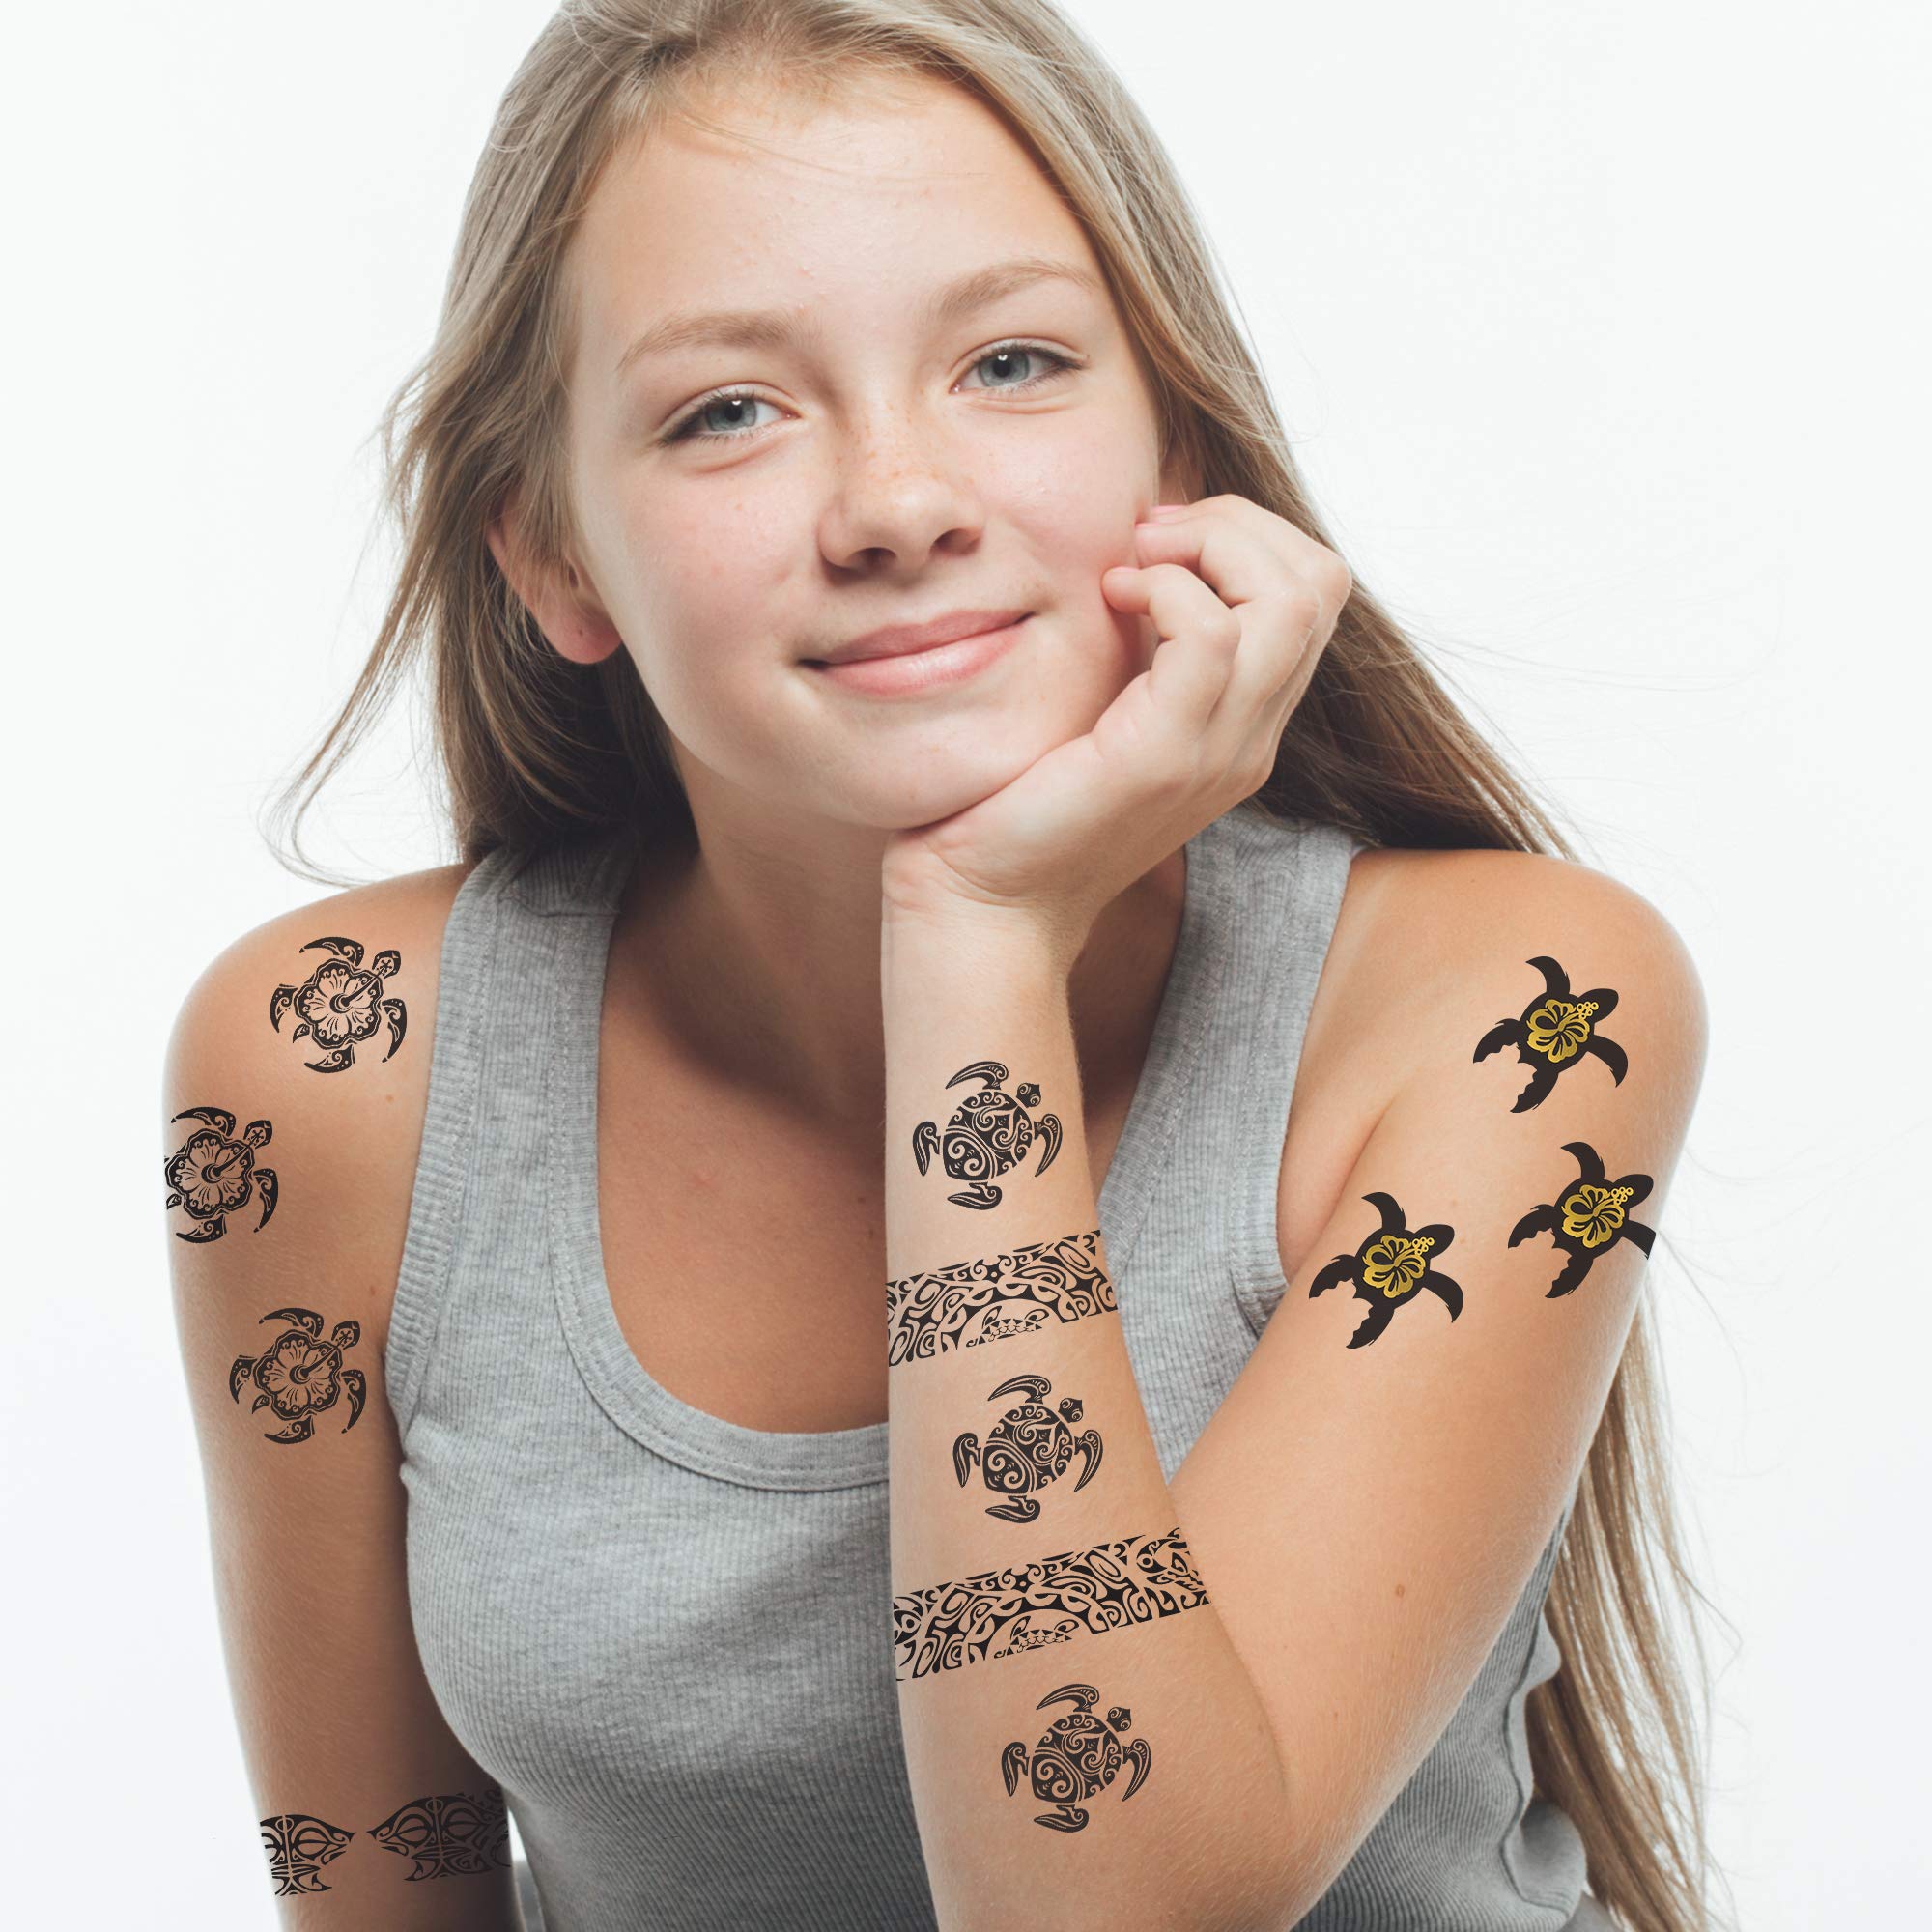 Turtle Trio Pack Temporary Tattoos (Pack of 12) | Skin Safe | MADE IN THE USA | Removable